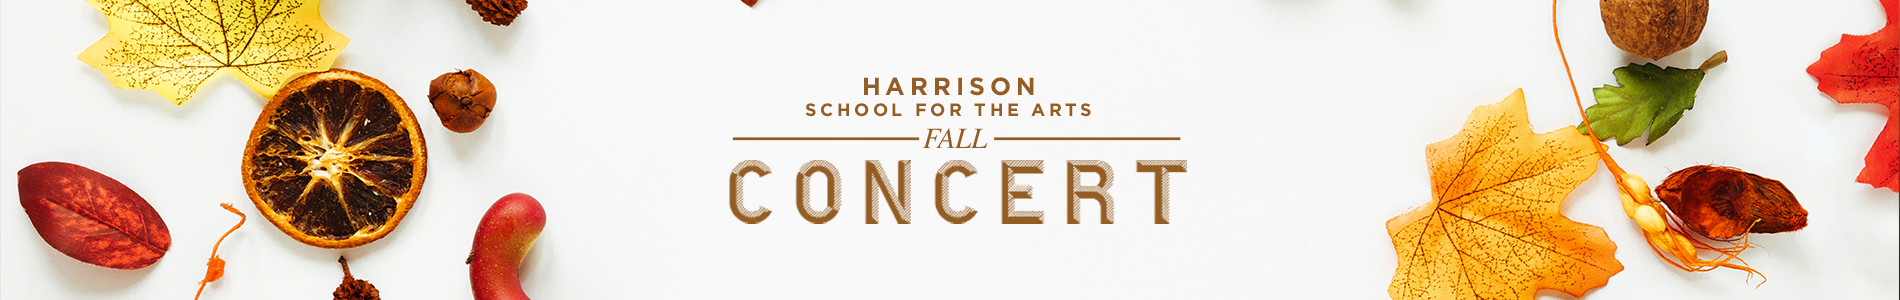 2019 Harrison School for the Arts Fall Concert